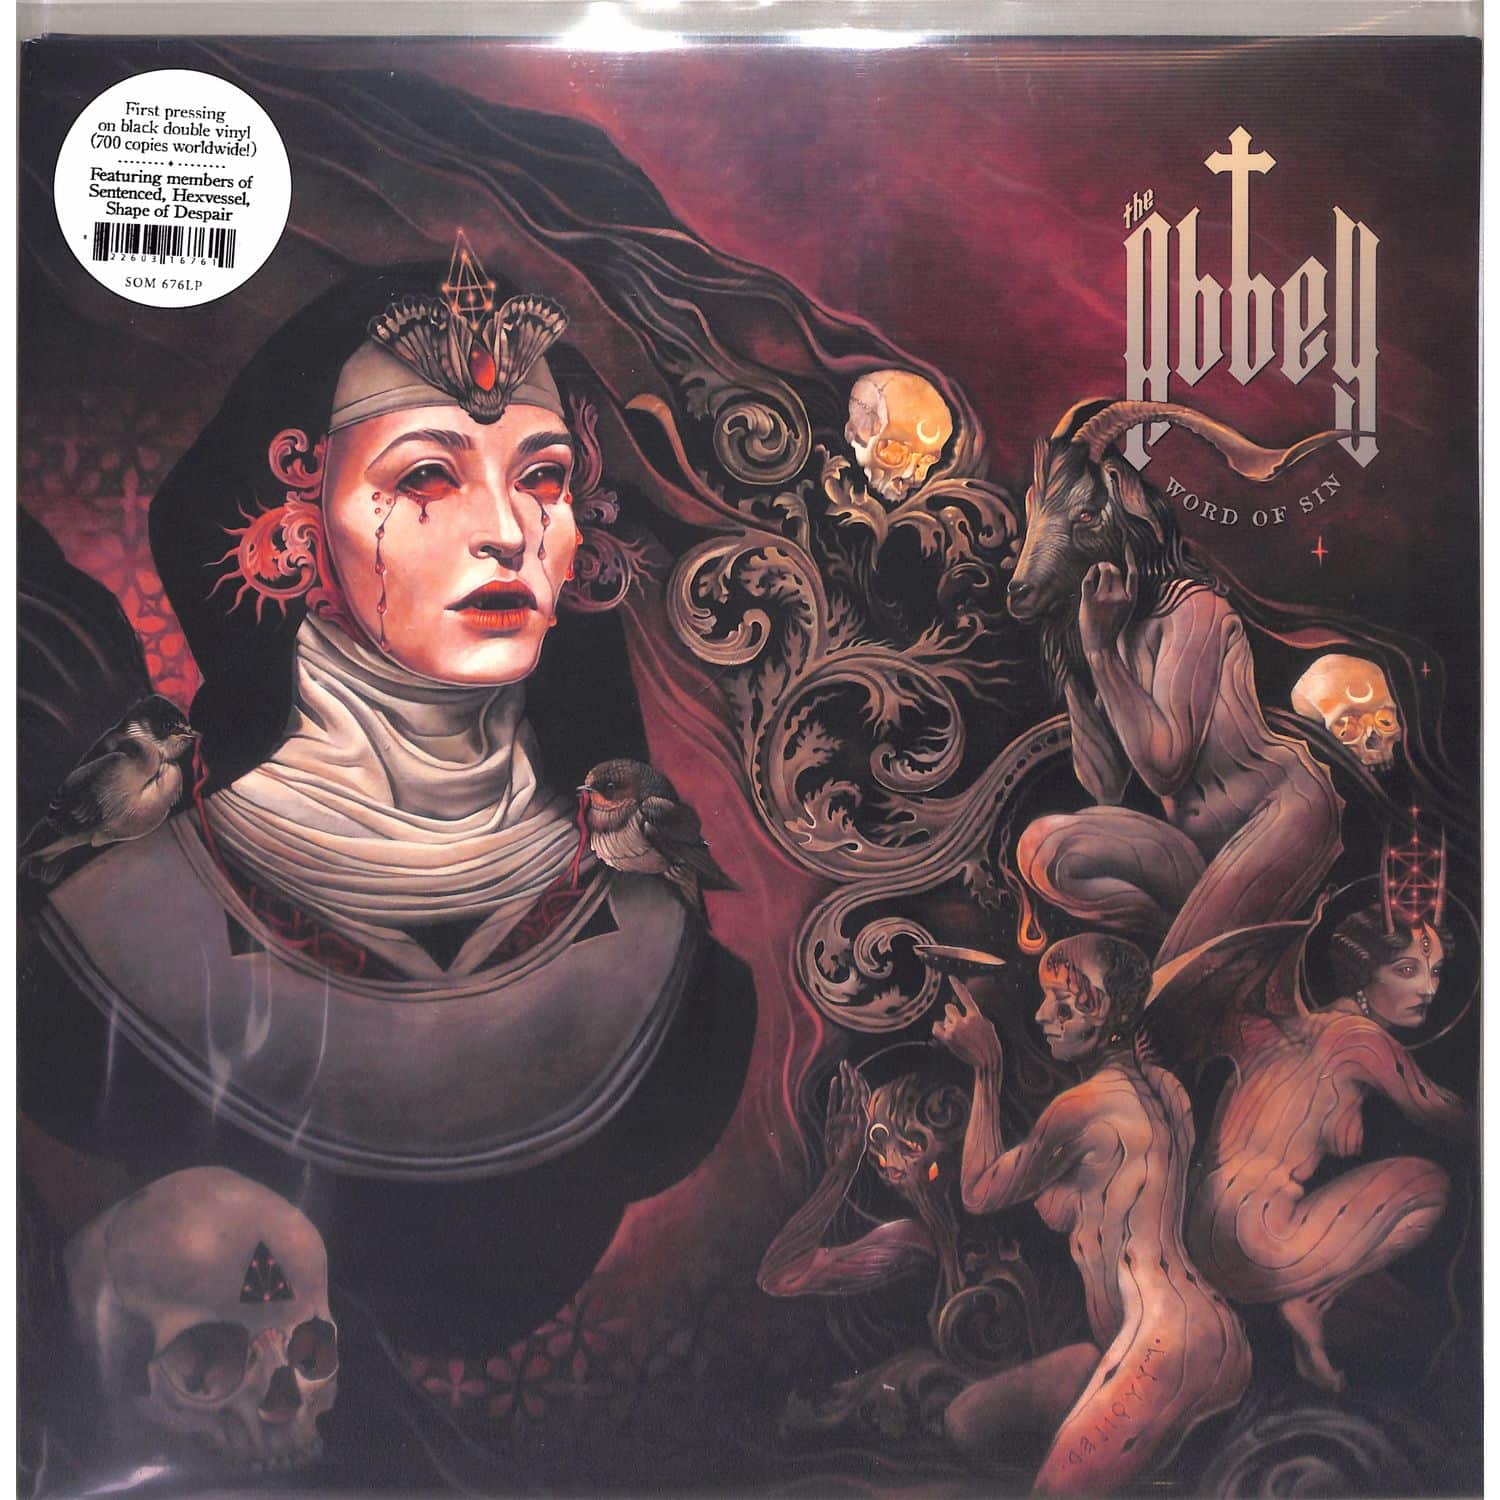  The Abbey - WORD OF SIN 